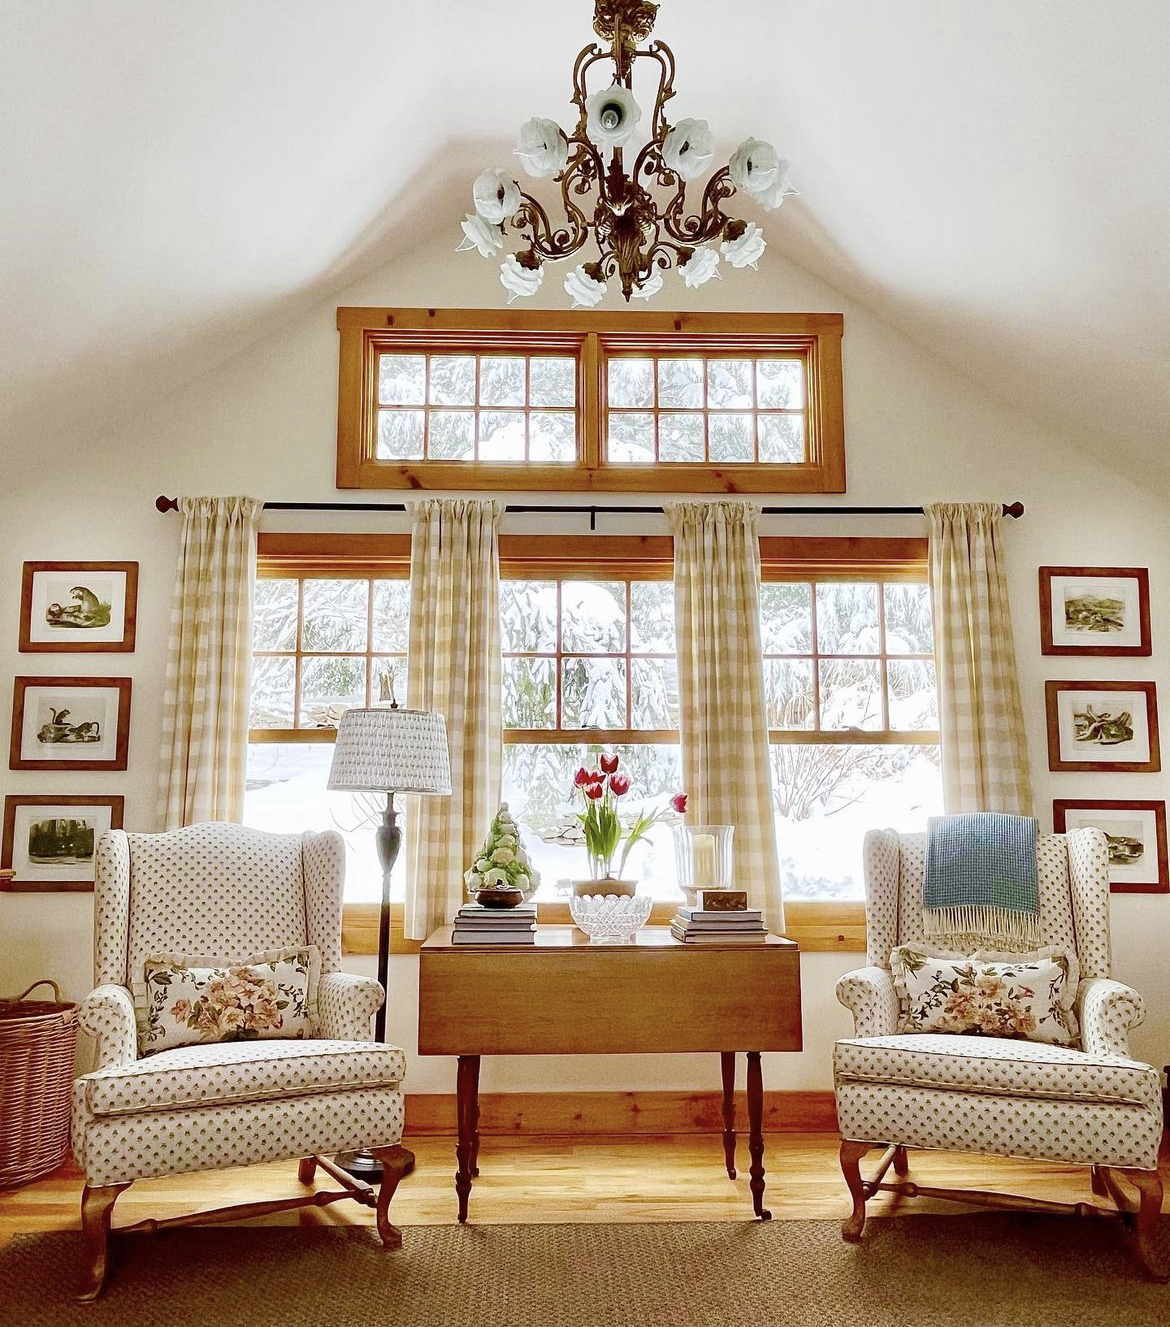 This part of the cottage living room is cozy and inviting, with a warm and rustic atmosphere that makes you feel right at home. The room is filled with natural light, thanks to the large windows. The walls are painted in a soft cream color, which adds to the room's charm and character.There are two comfortable armchairs, upholstered in a soft and cozy fabric that invites you to curl up and read a book. The armchairs are placed next to a small side table, which is perfect for placing a cup of tea or a book.The side table is made of wood, and it has a natural look that complements the rest of the room's décor. On top of the table, there is a small vase of freshly picked flowers, which adds a touch of color and freshness to the room.